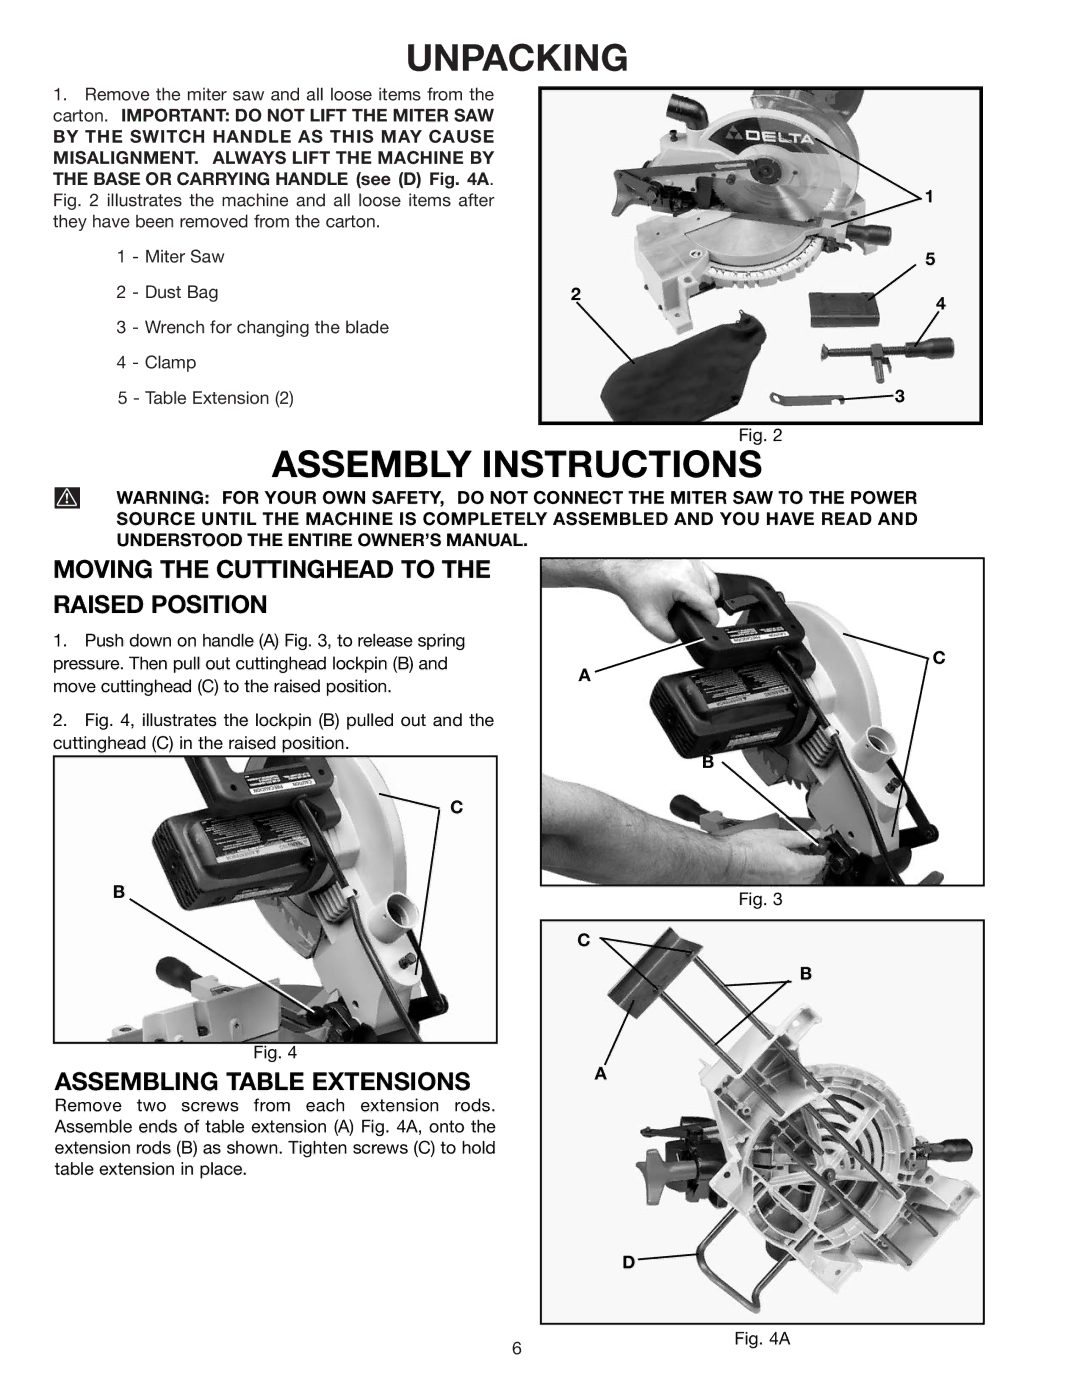 Porter-Cable 36-225 instruction manual Unpacking, Moving the Cuttinghead to Raised Position, Assembling Table Extensions 